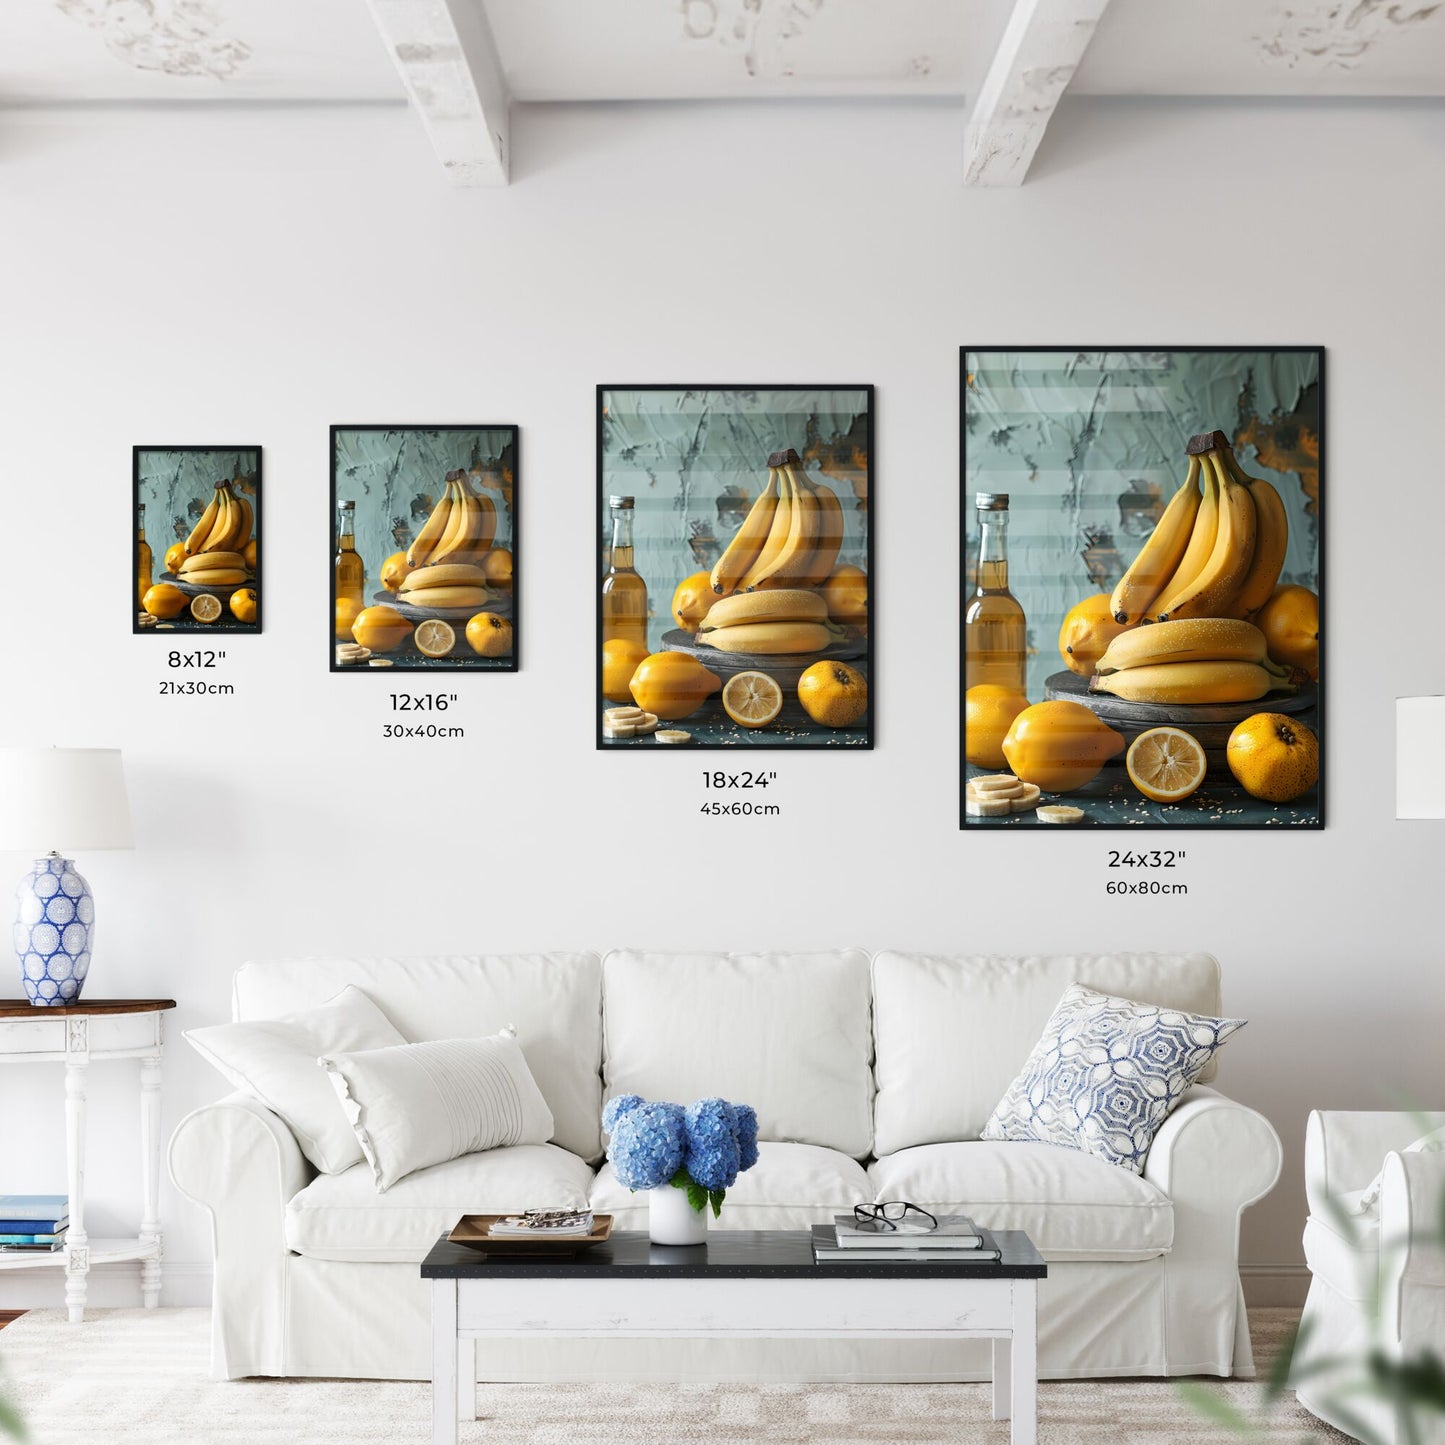 Artistic Table Decor Featuring Banana-Inspired Delicacies and Vibrant Still Life Painting Default Title